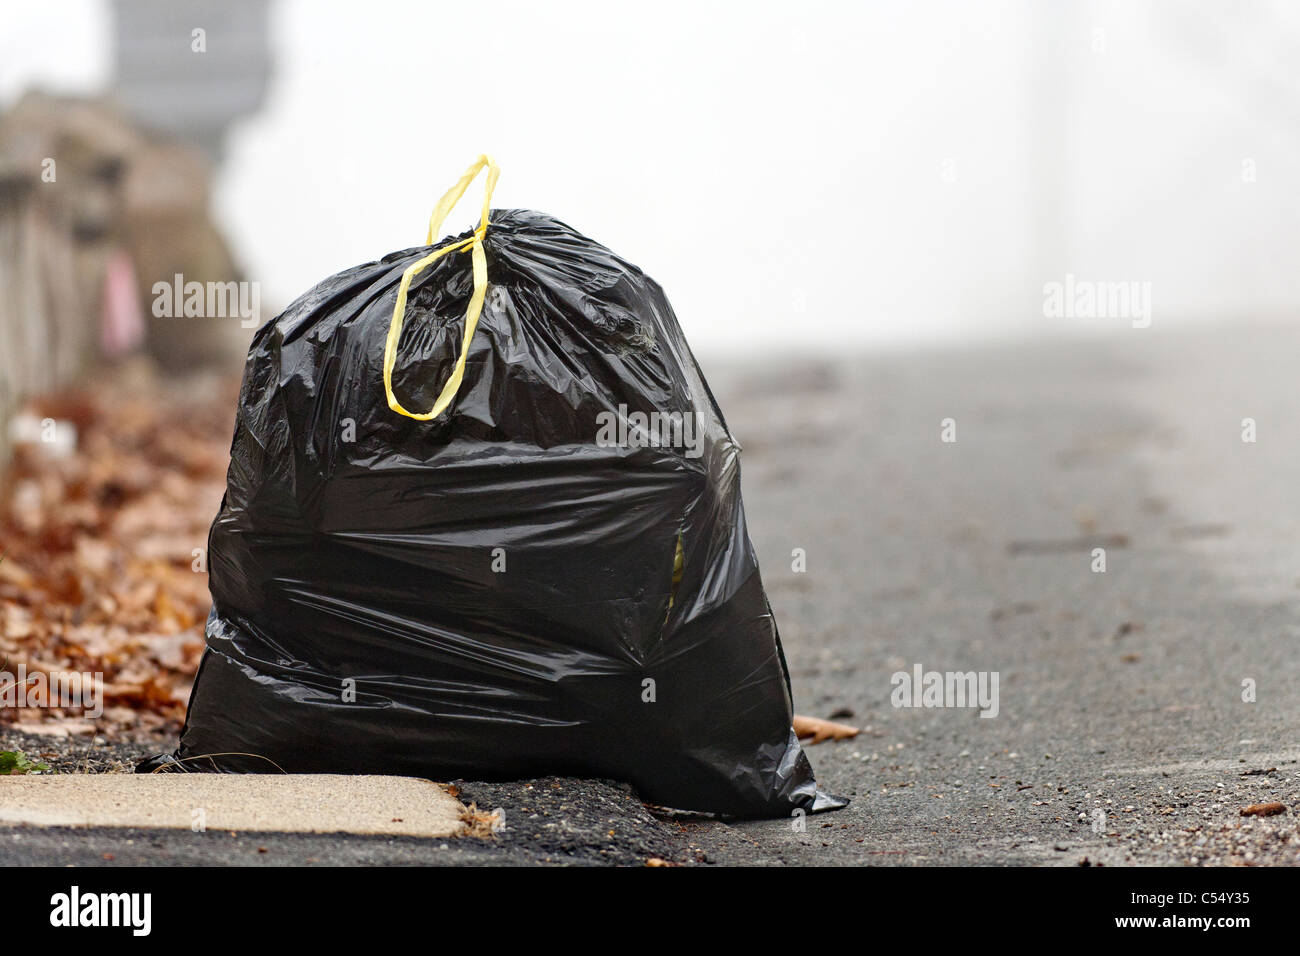 Garbage Bag to be recycled. Stock Photo